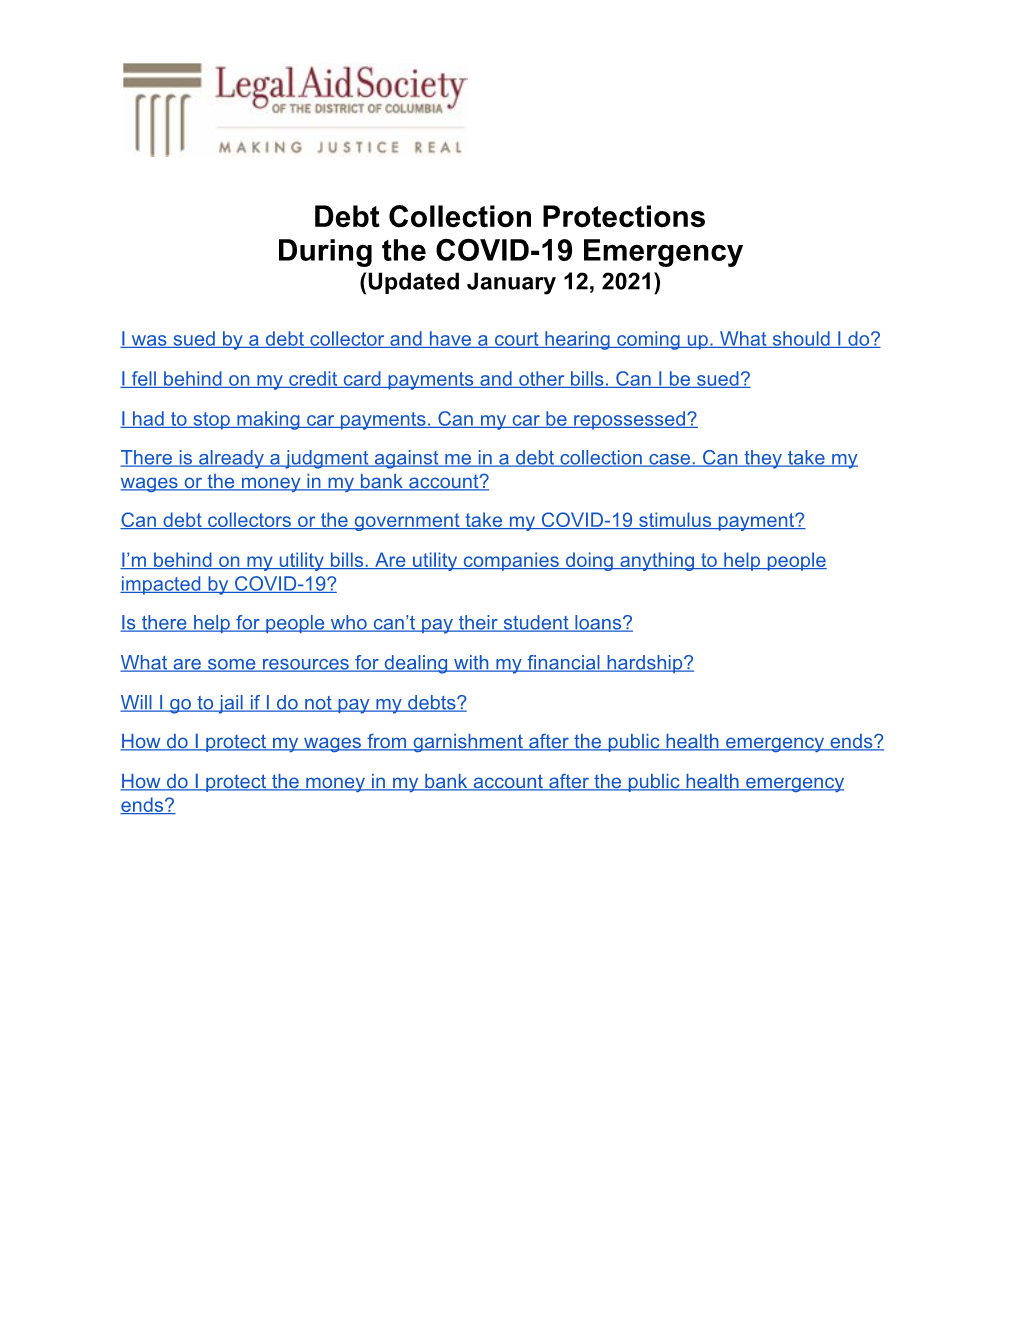 Debt Collection Protections During the COVID-19 Emergency (Updated January 12, 2021)